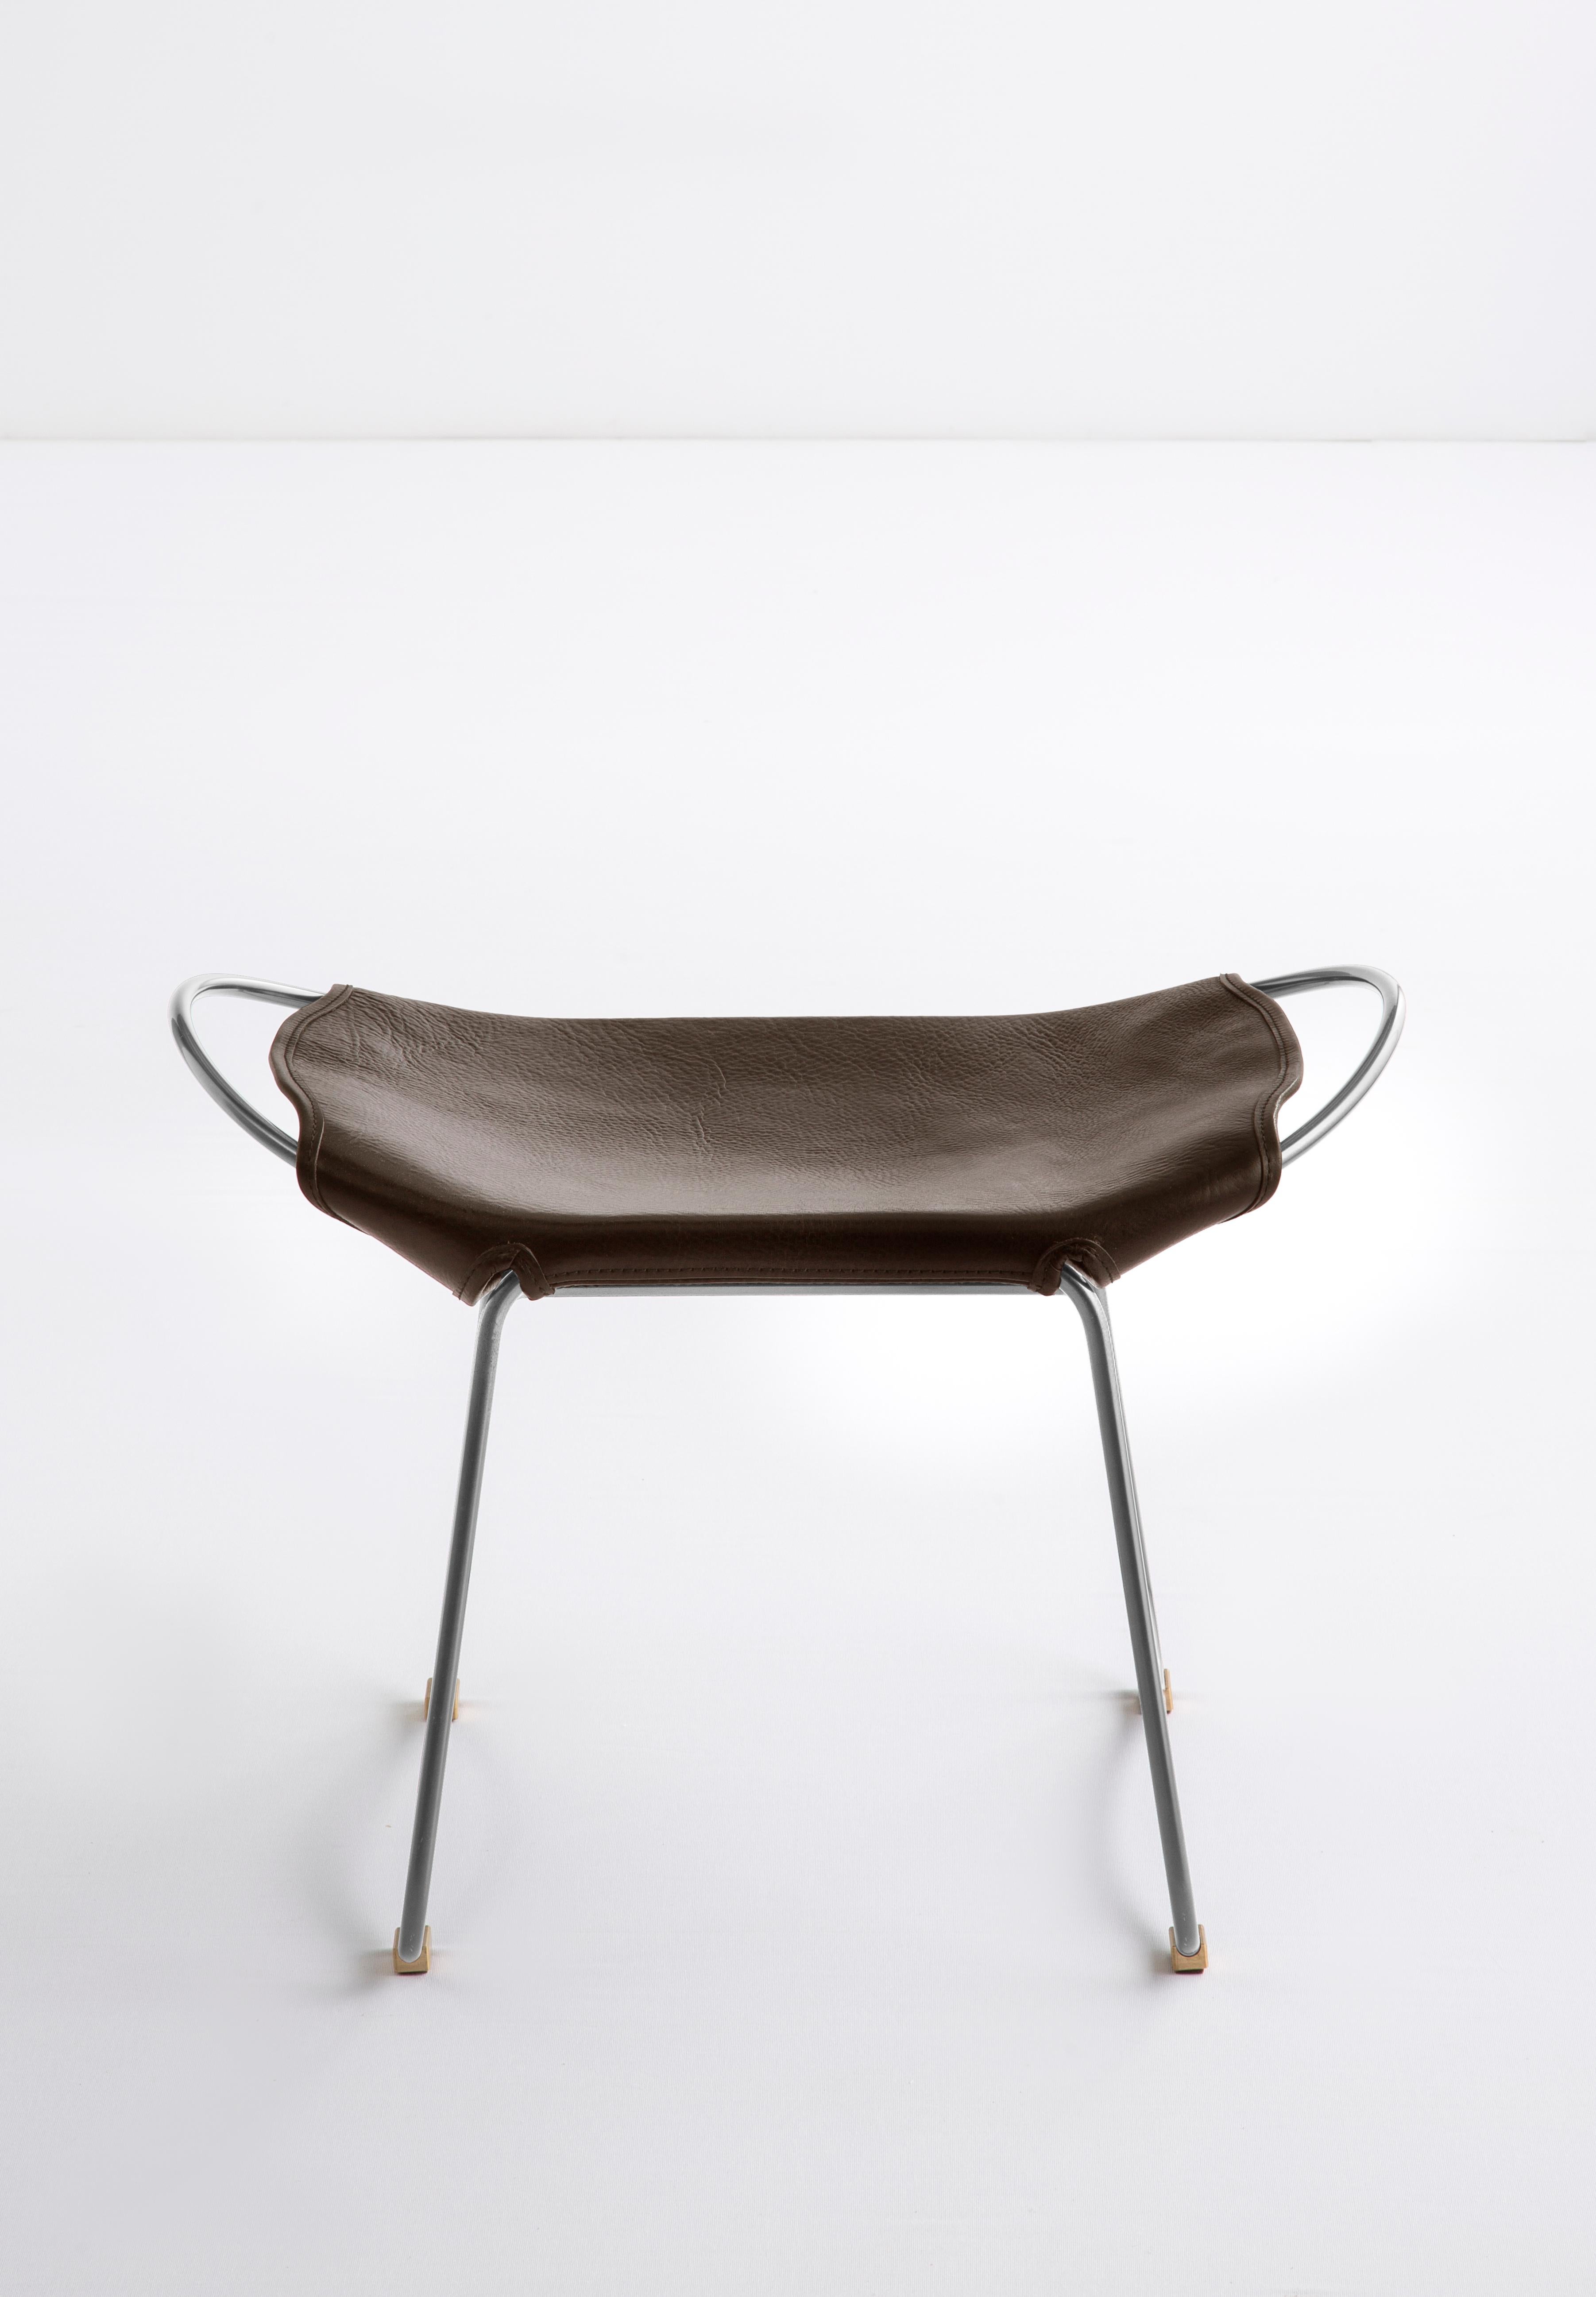 Spanish Footstool, Silver Steel and Dark Brown Saddle Leather, Modern Style, Hug For Sale